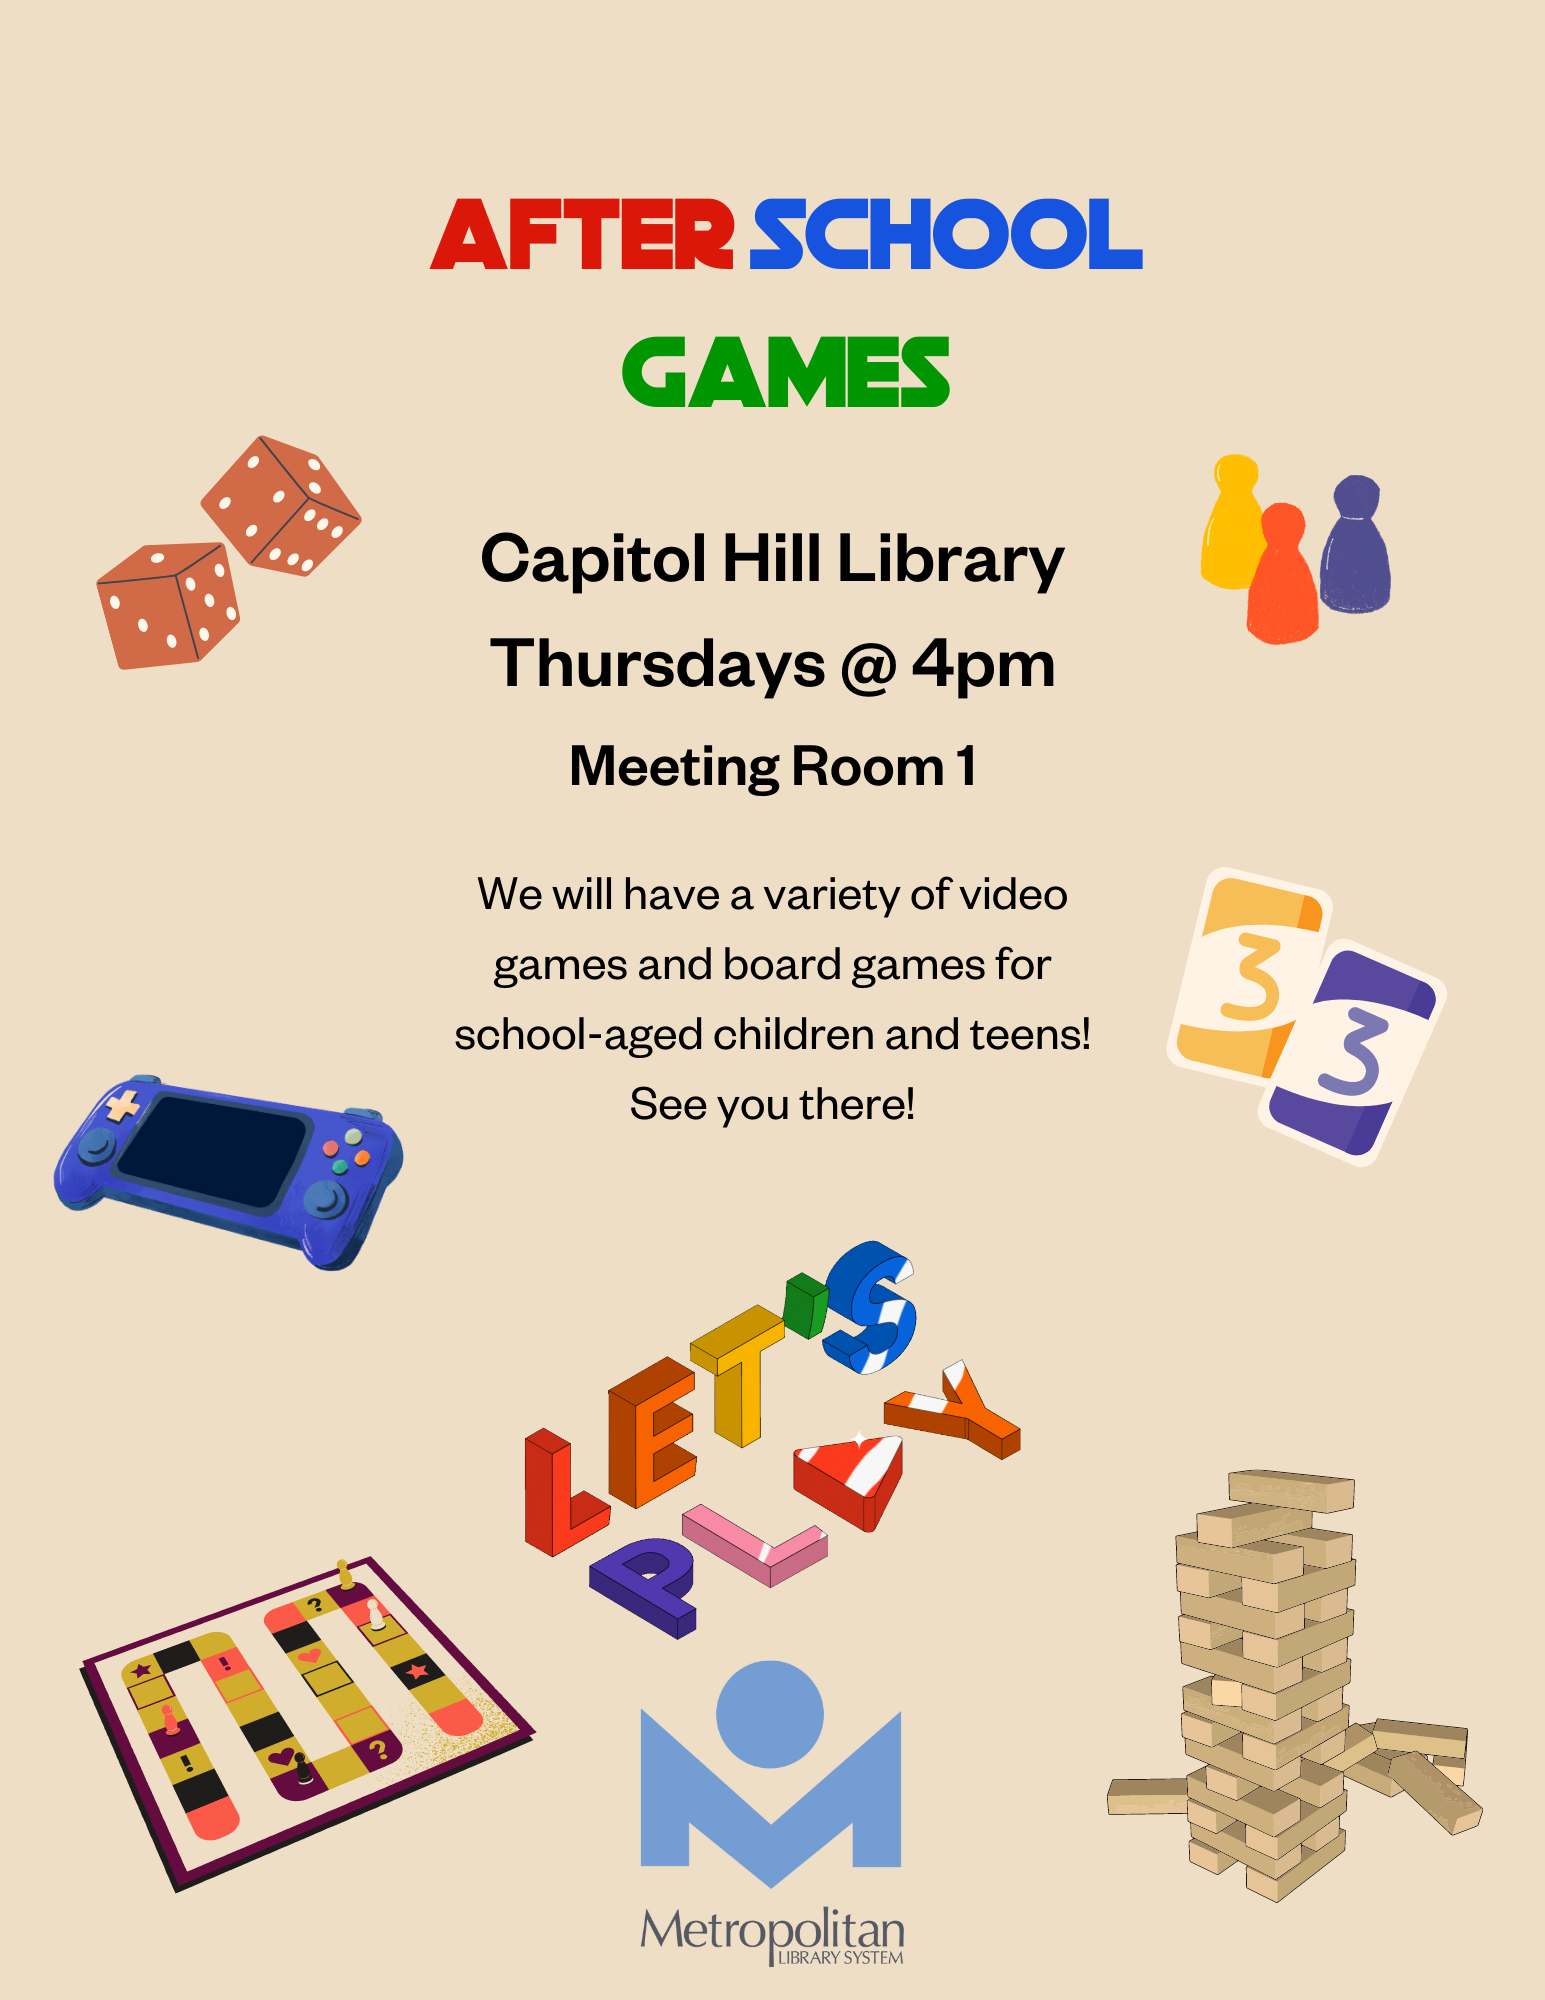 After School Games  Metropolitan Library System